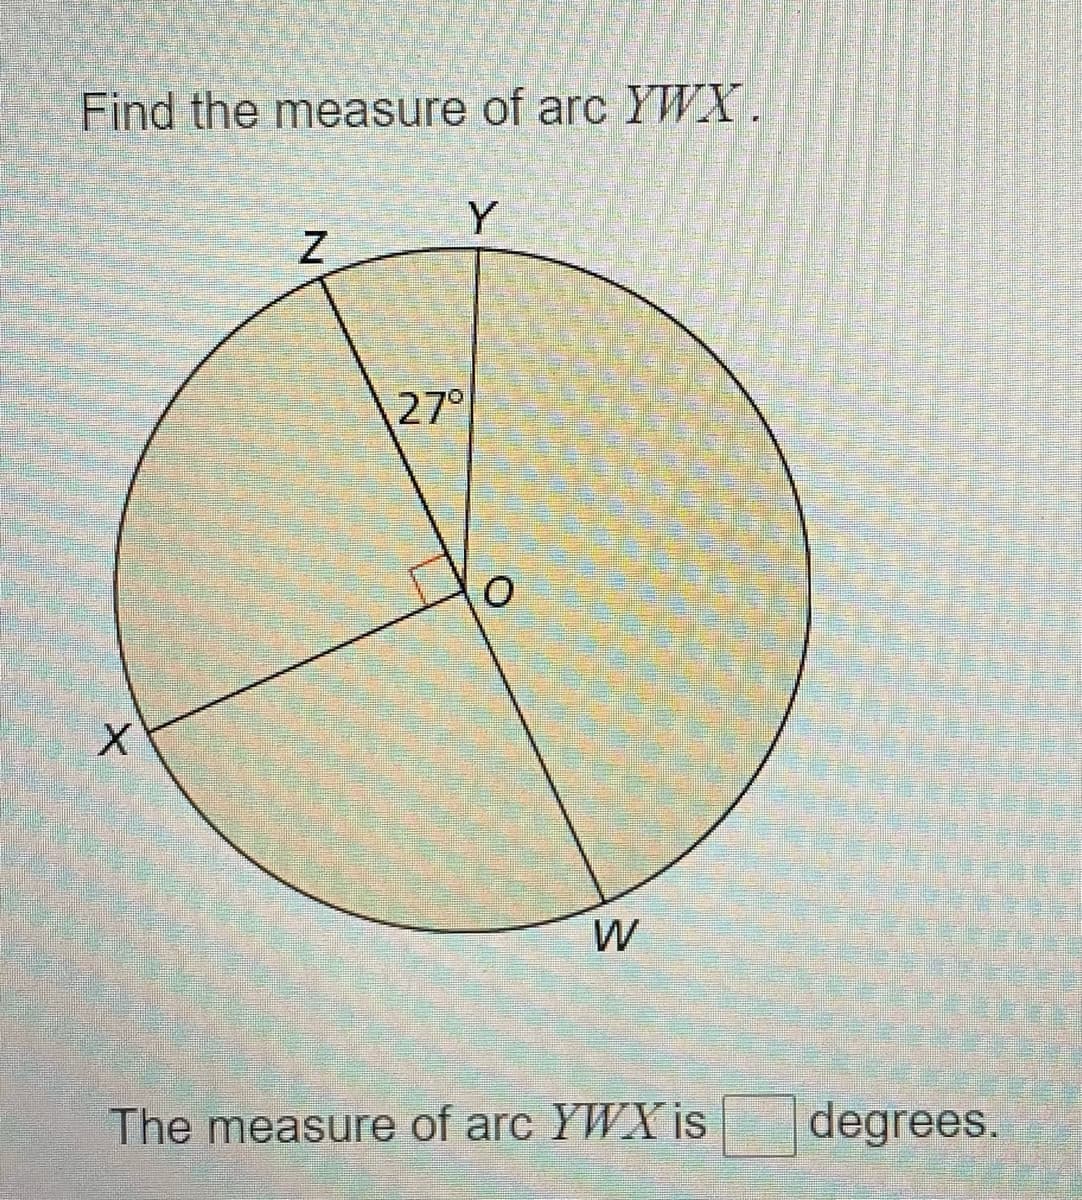 Find the measure of arc YWX.
Y
27°
W
The measure of arc YWX is
degrees.
